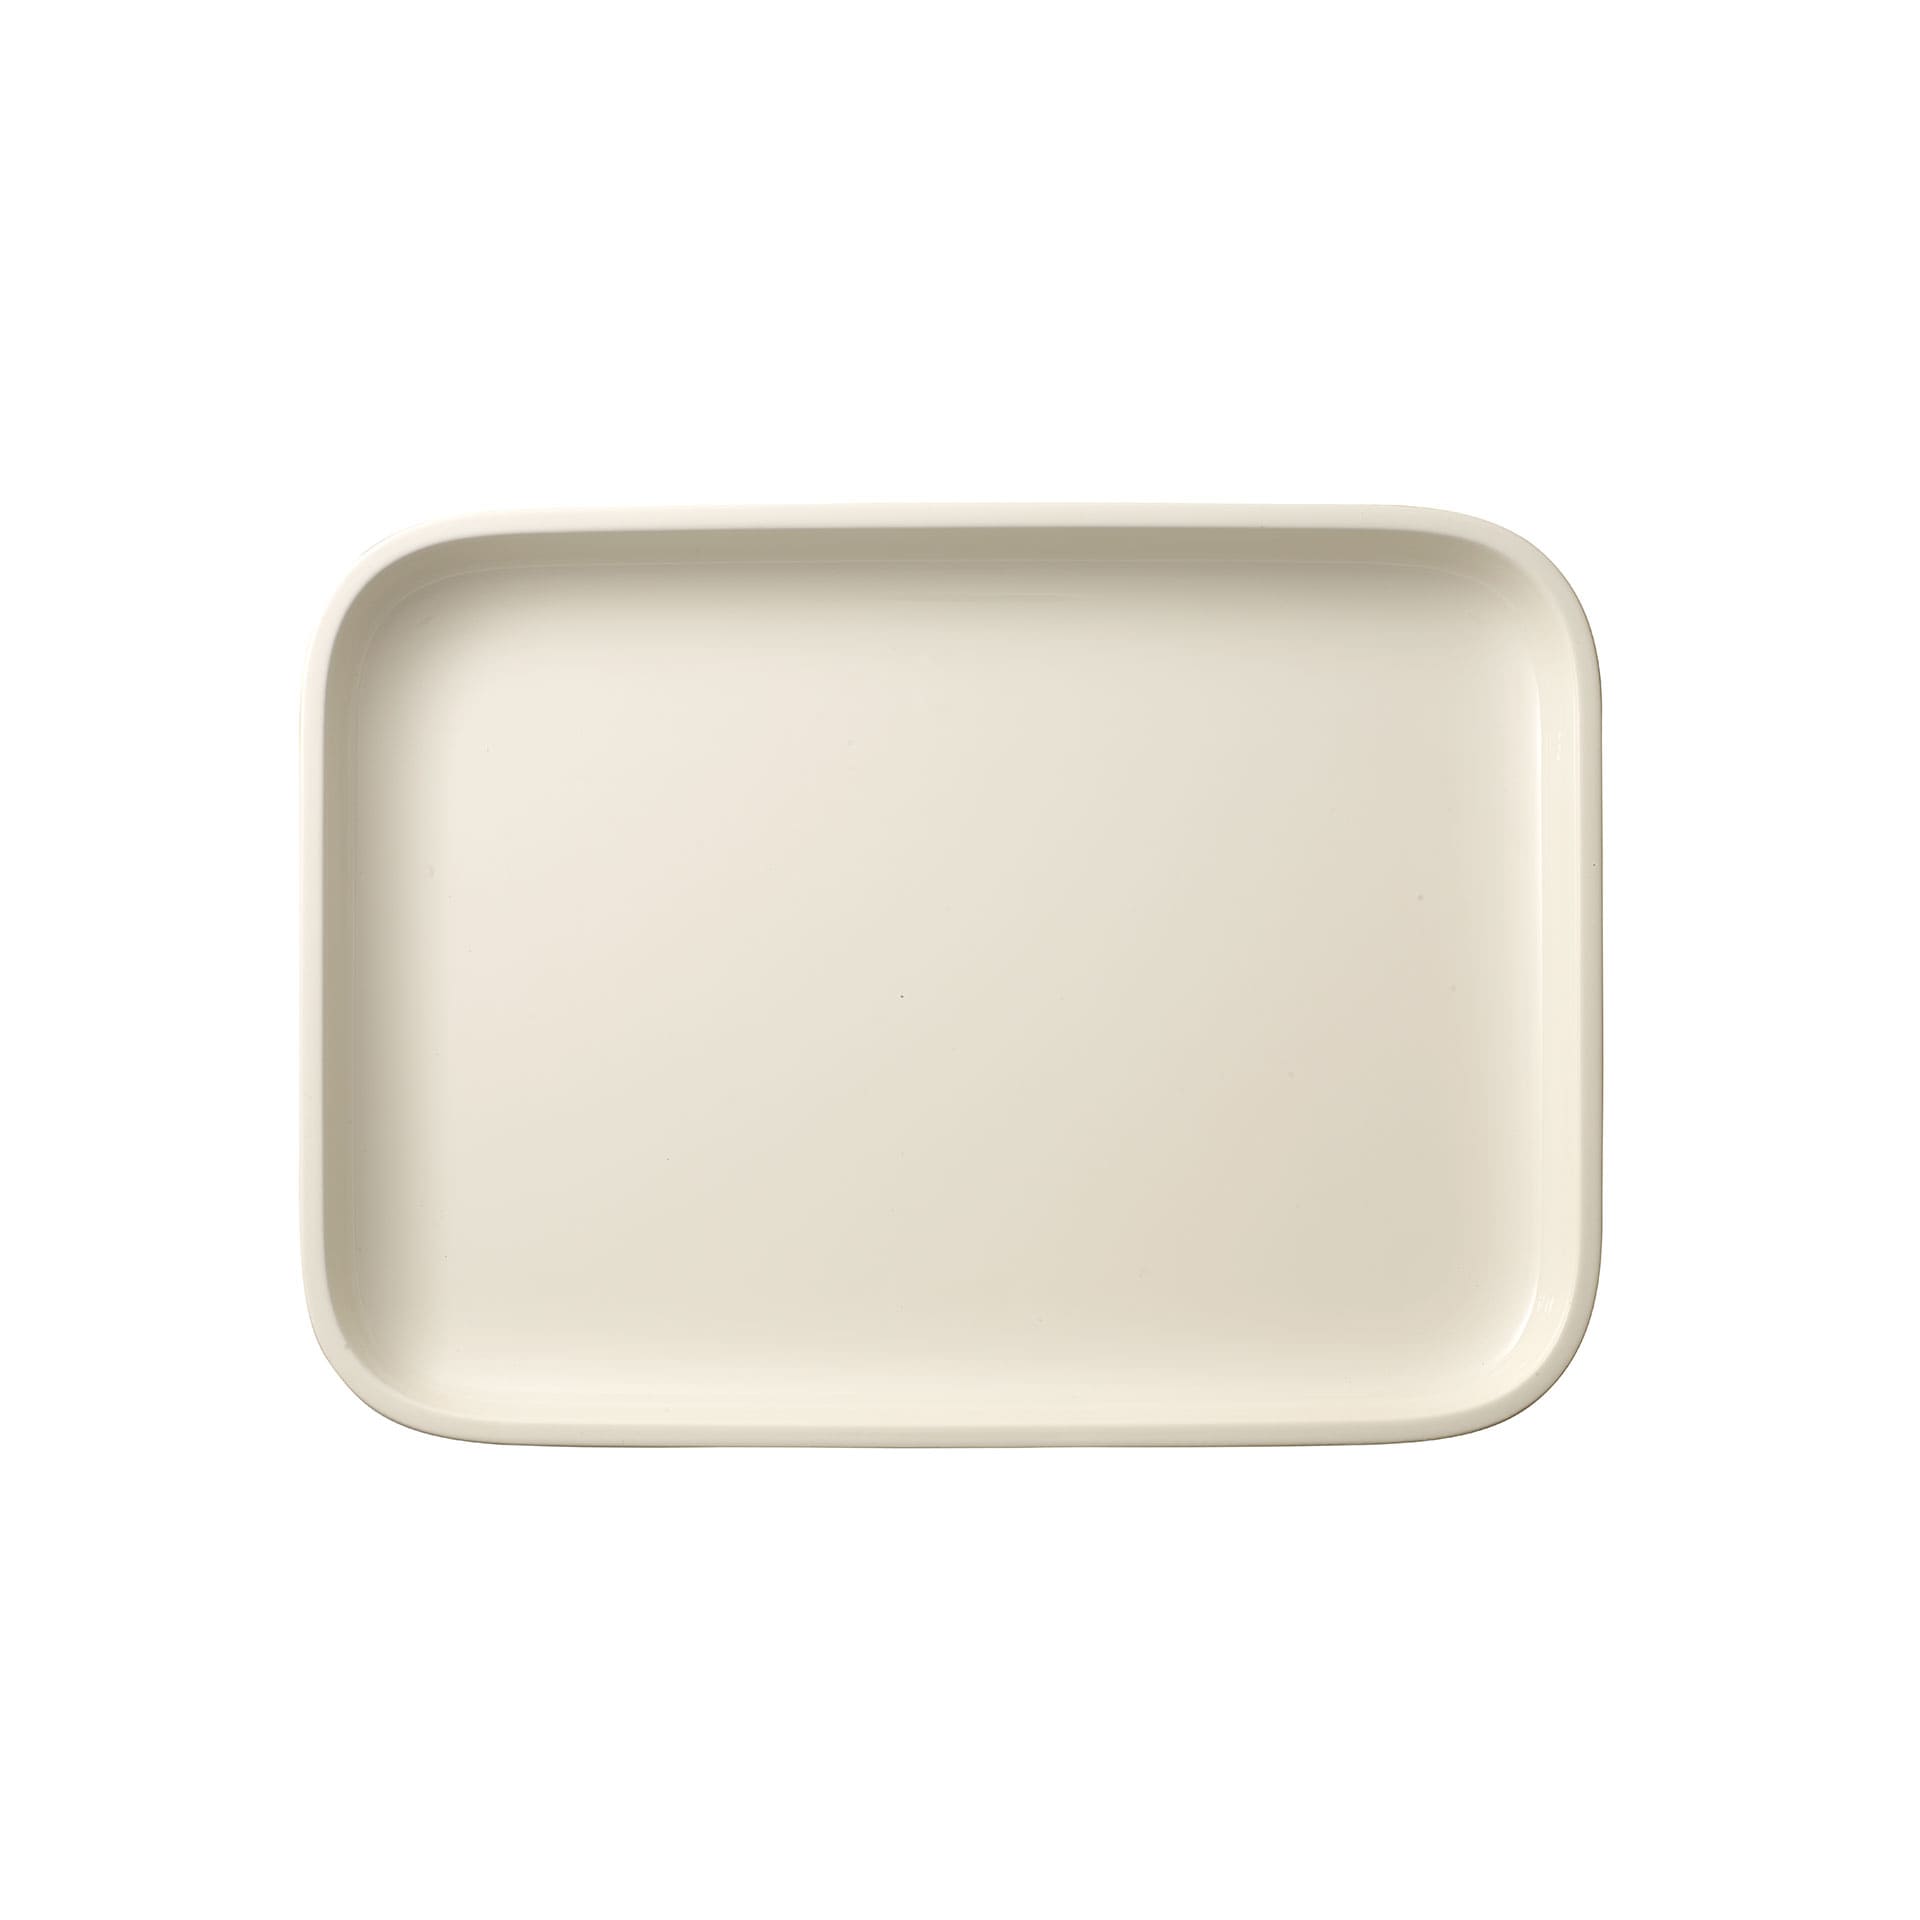 Clever Cooking serving dish/rectangular cover VilleroyBoch